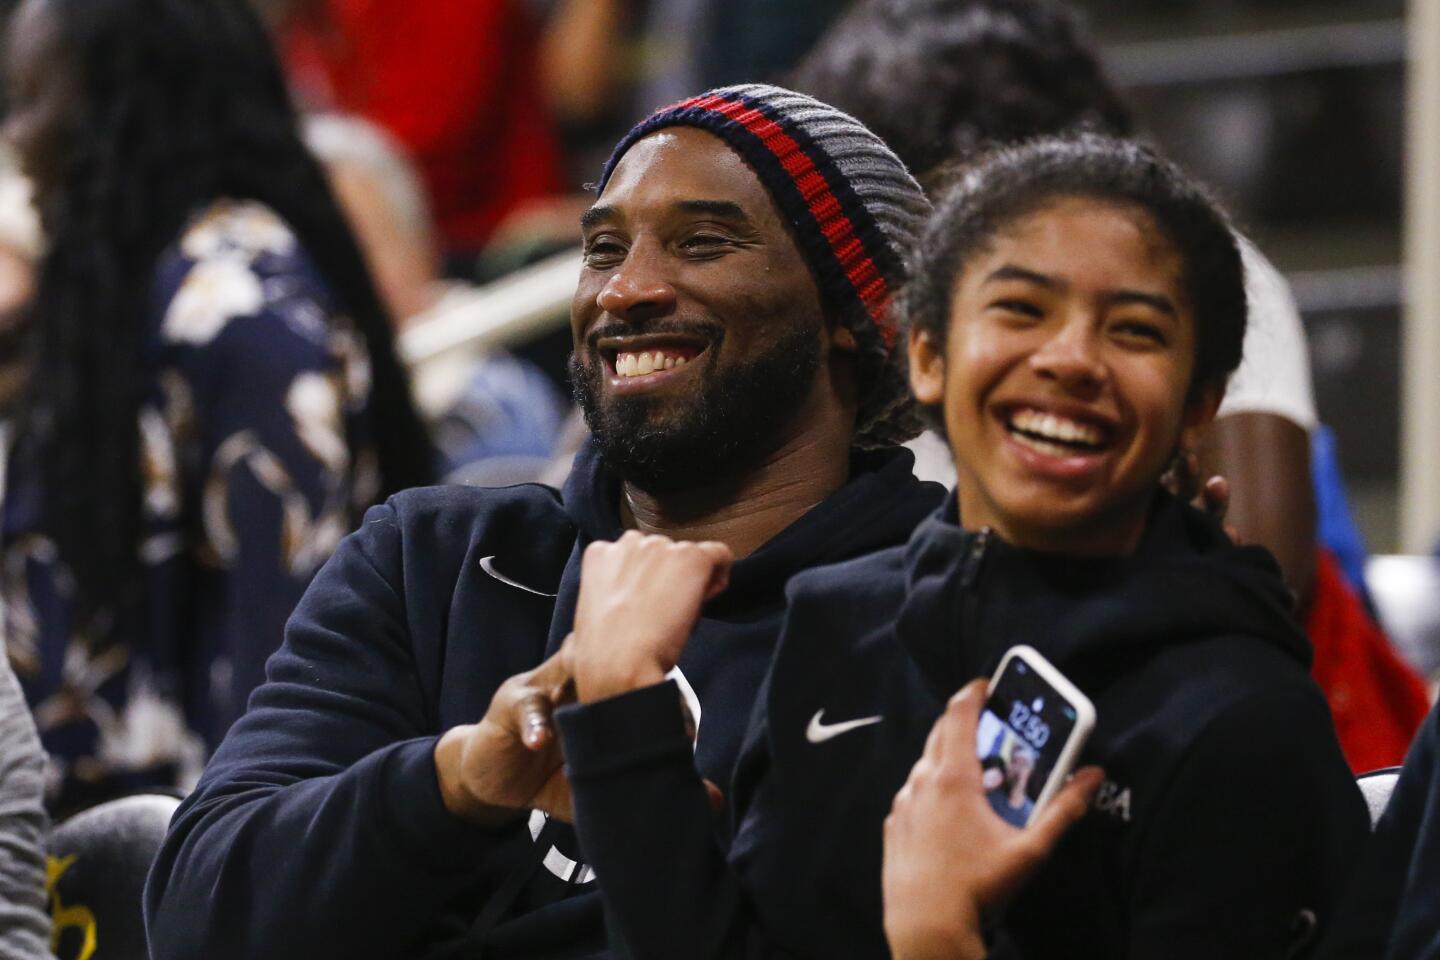 Kobe and Gianna Bryant at a women's college basketball game Dec. 14, 2019.